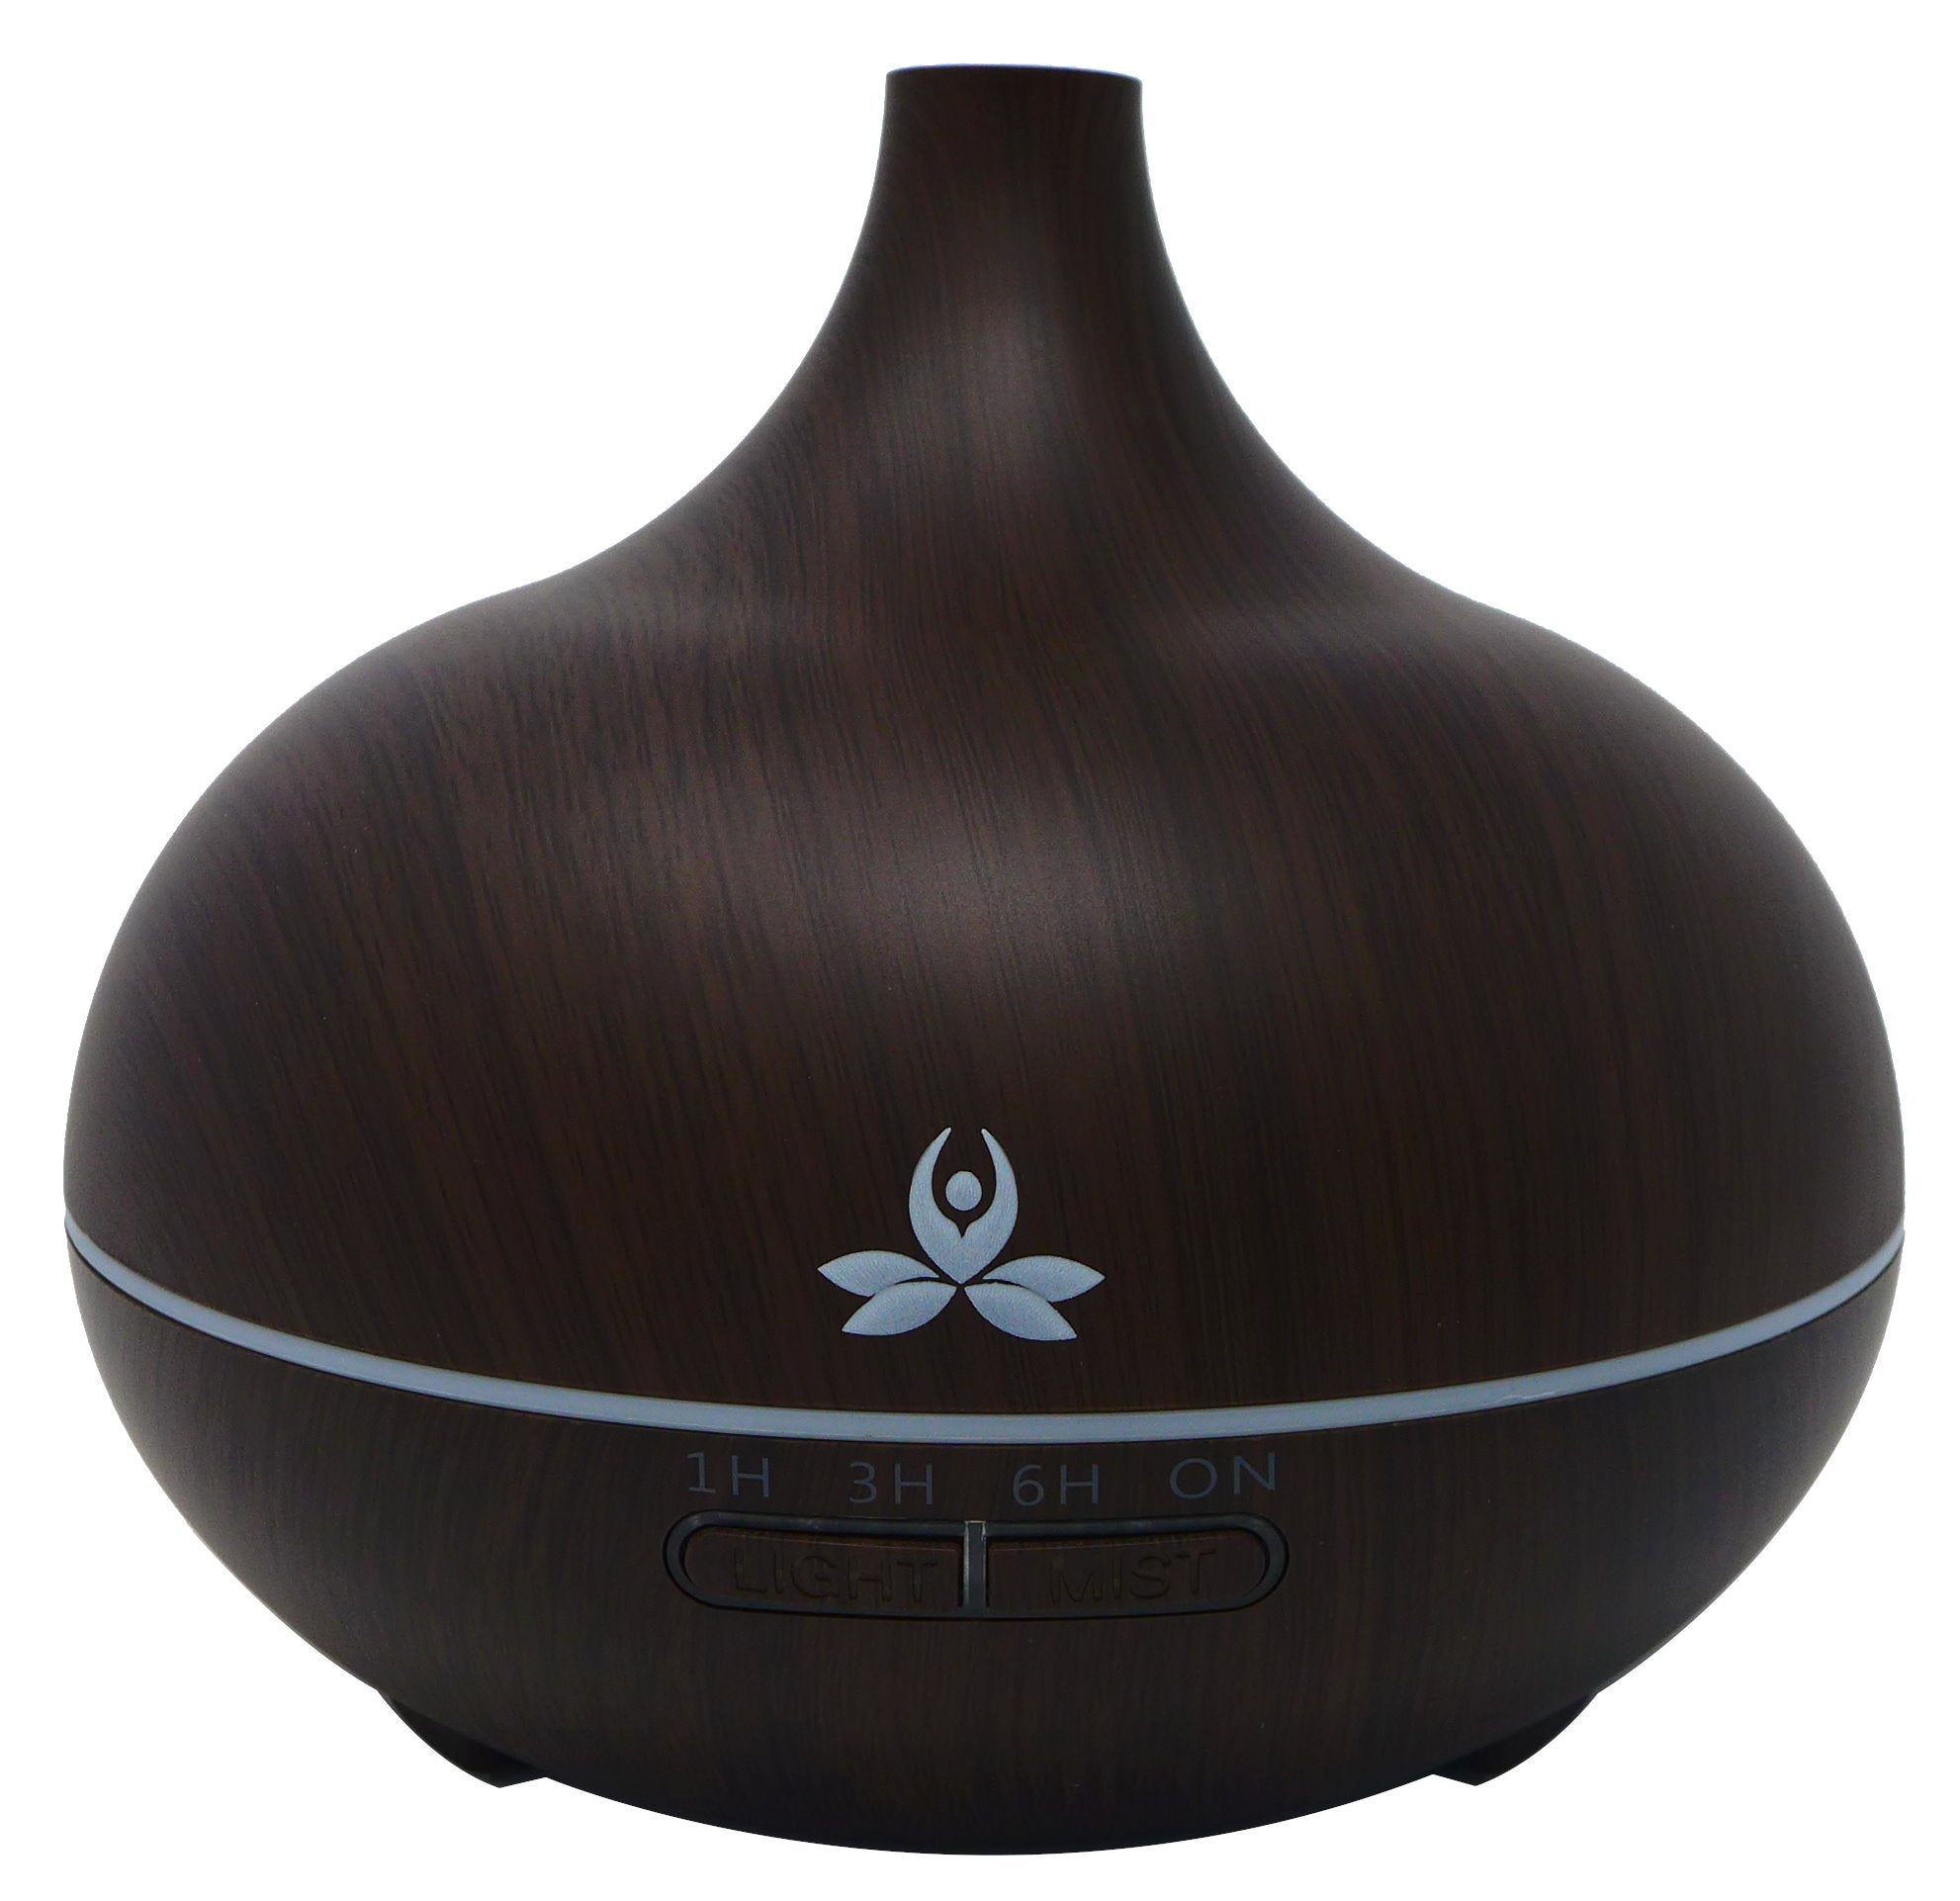 Essential Oil Diffuser For Home Or Office (Shanthi) Electronic Diffuser dark brown 